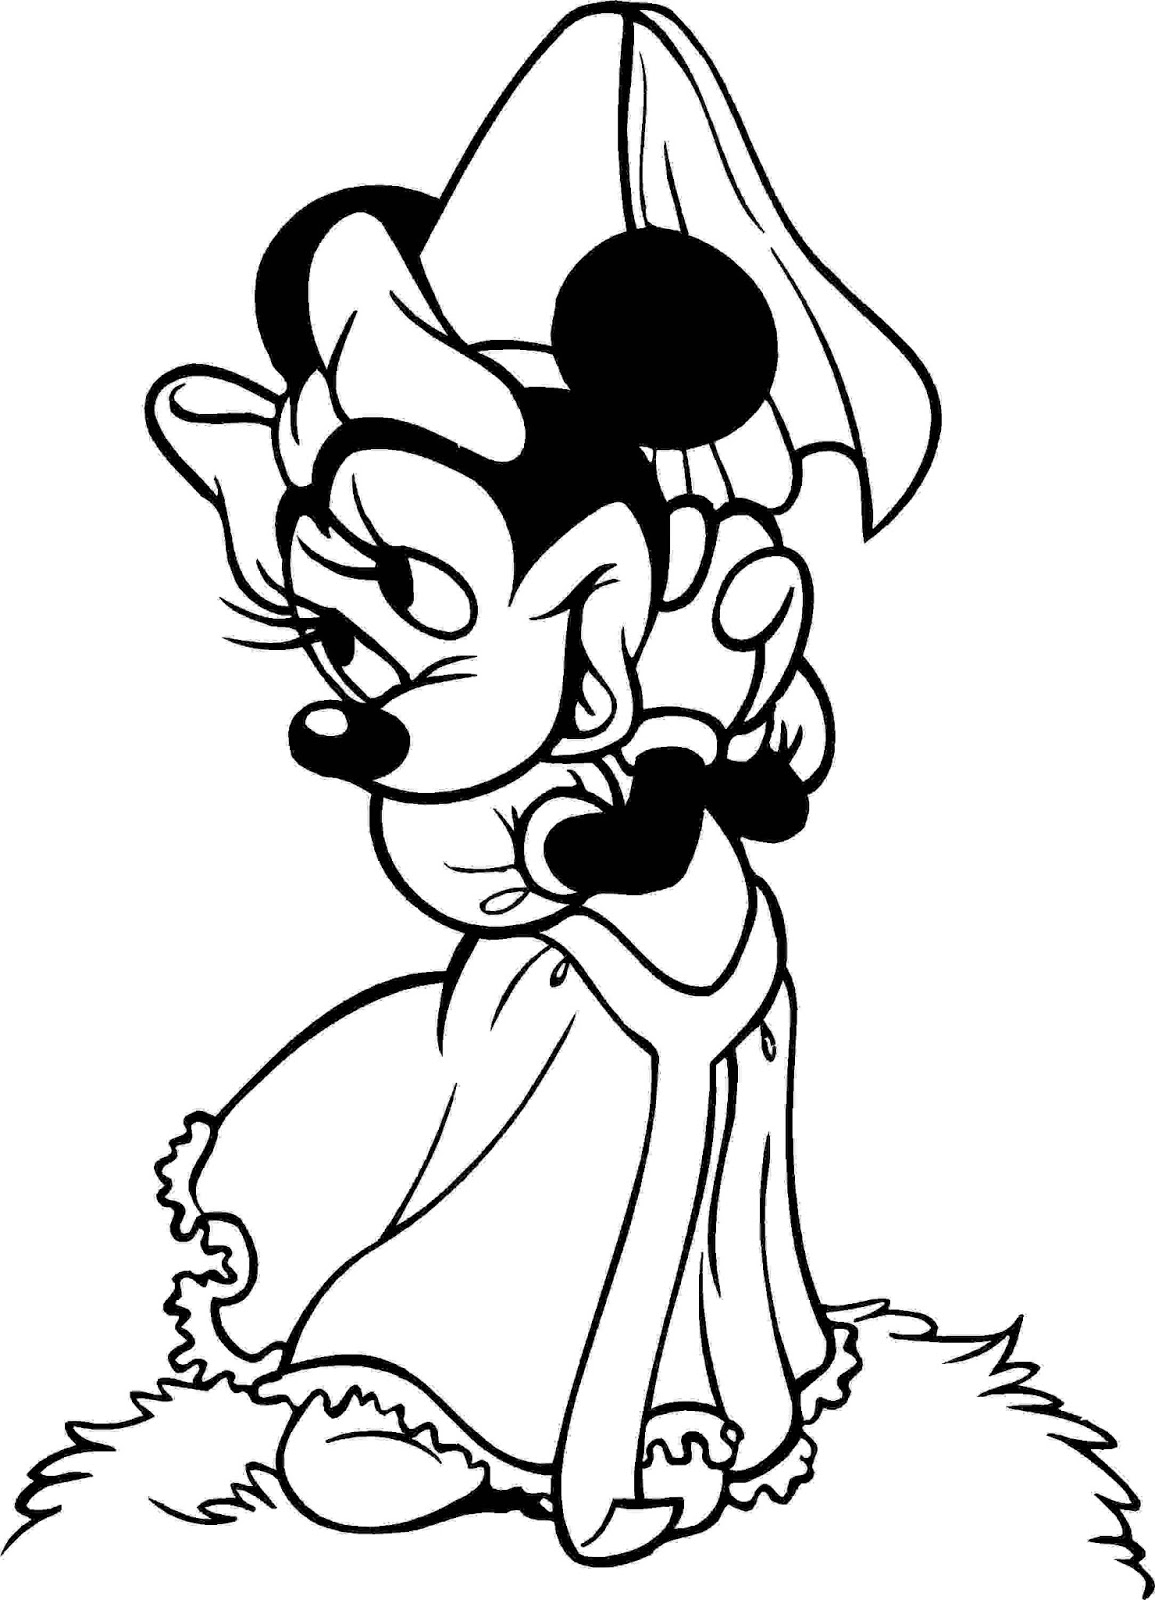 free-printable-minnie-mouse-coloring-pages-get-your-hands-on-amazing